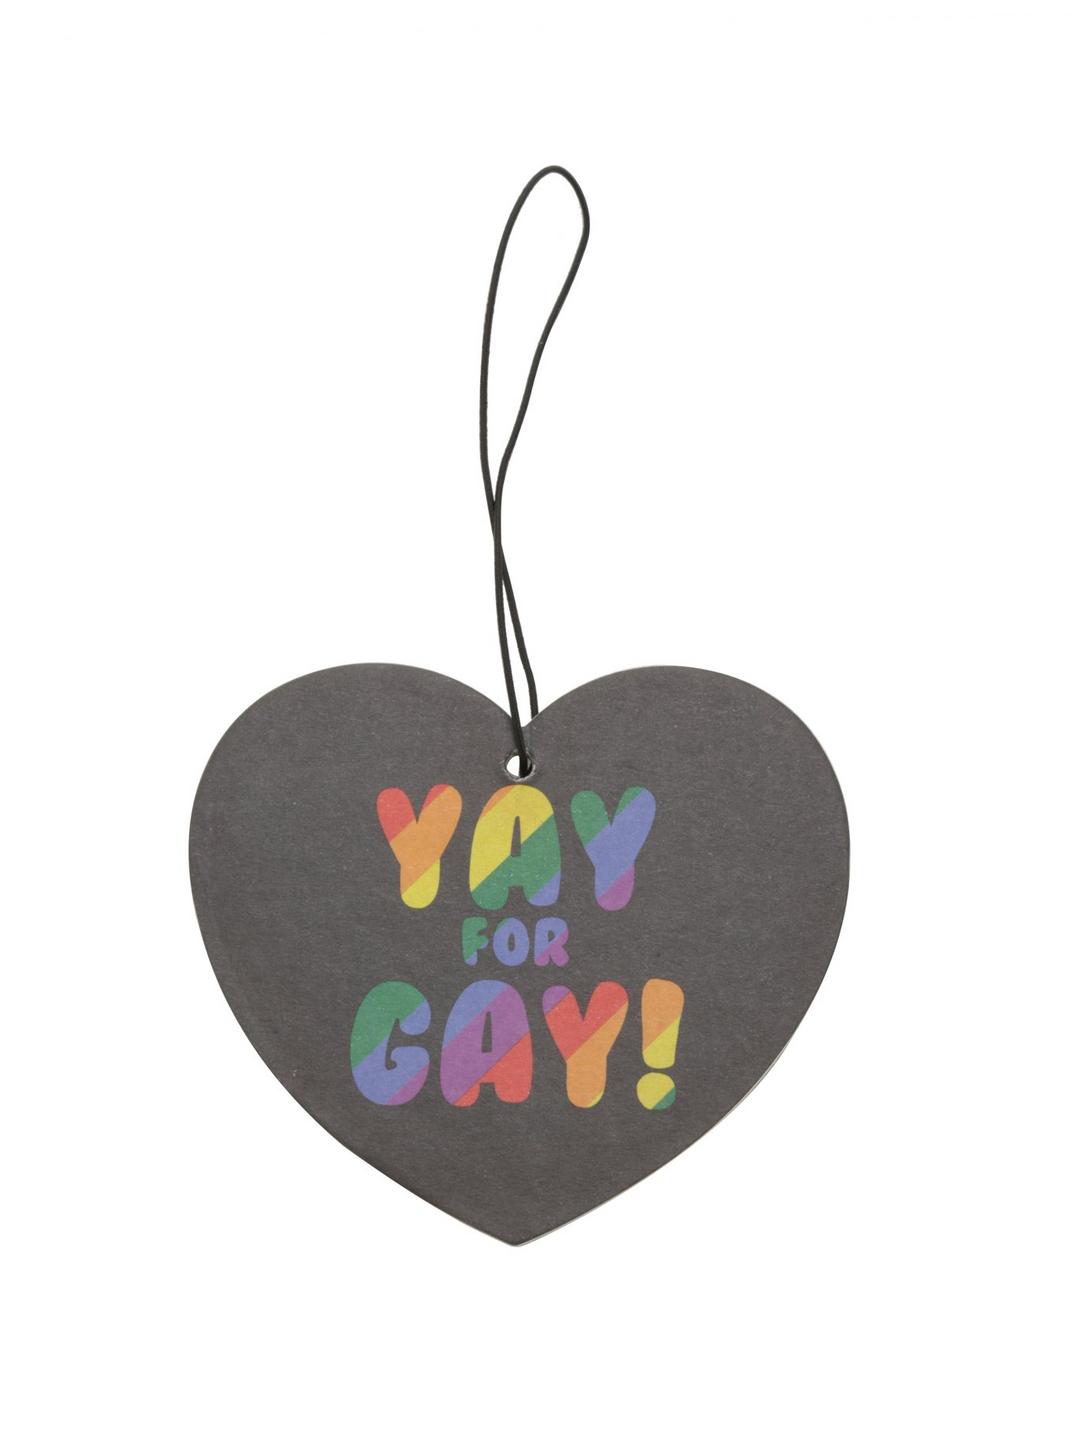 Loungefly Yay For Gay Heart Air Freshener 2 Pack, , hi-res